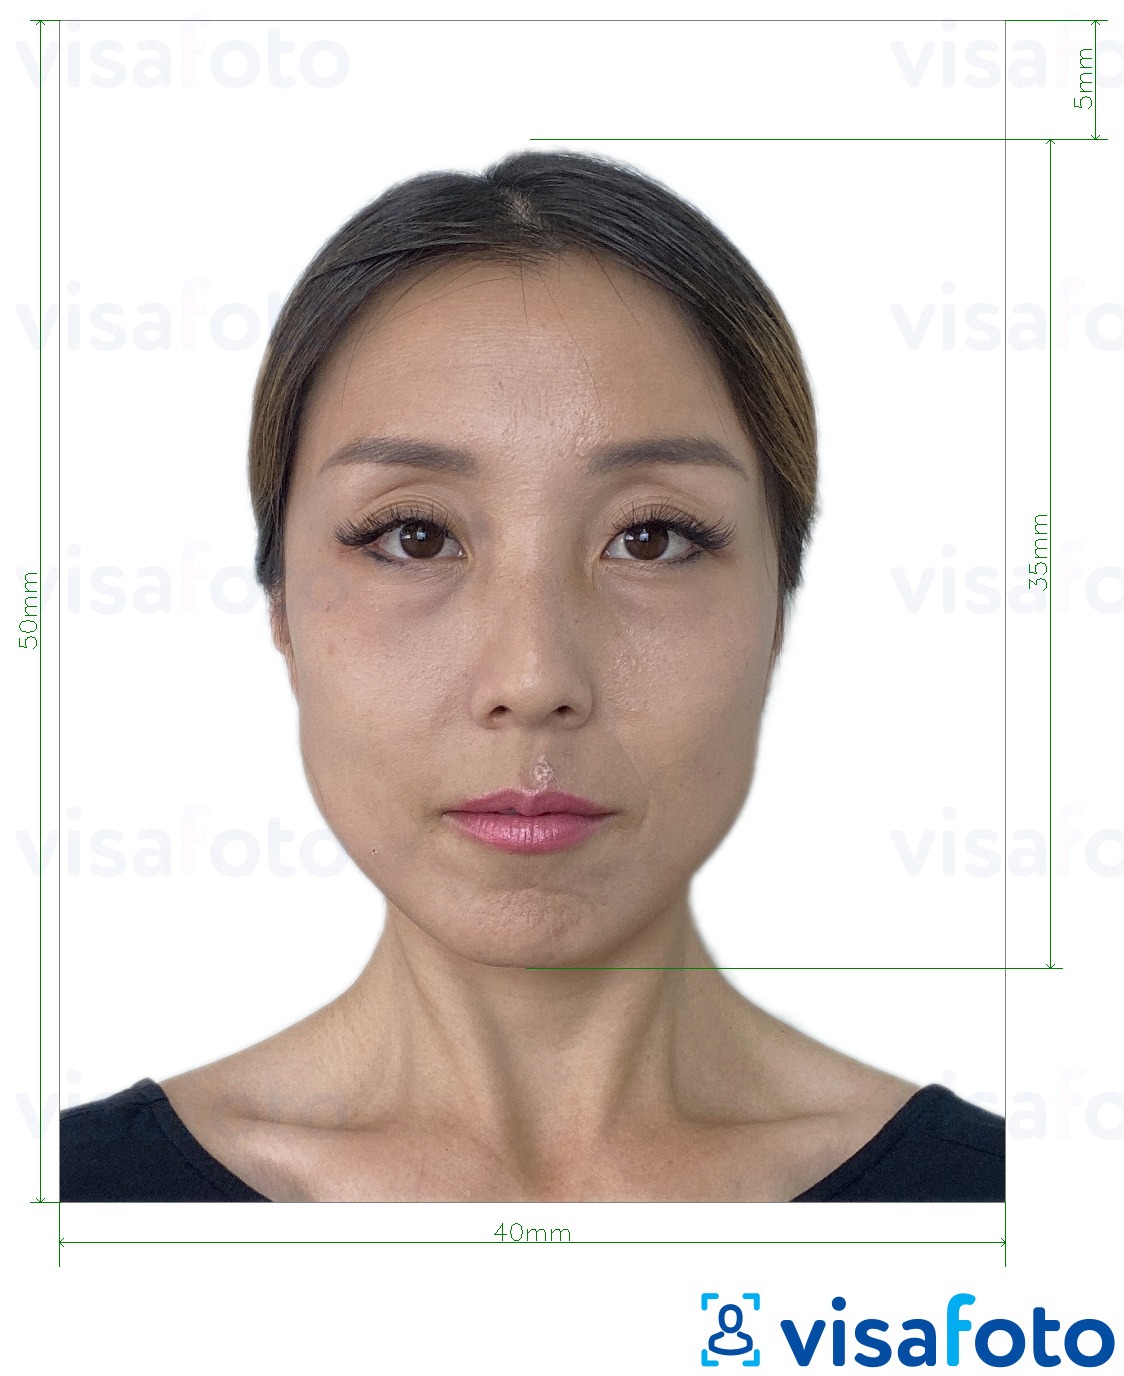 Example of photo for Hong Kong Visa 40x50 mm (4x5 cm) with exact size specification